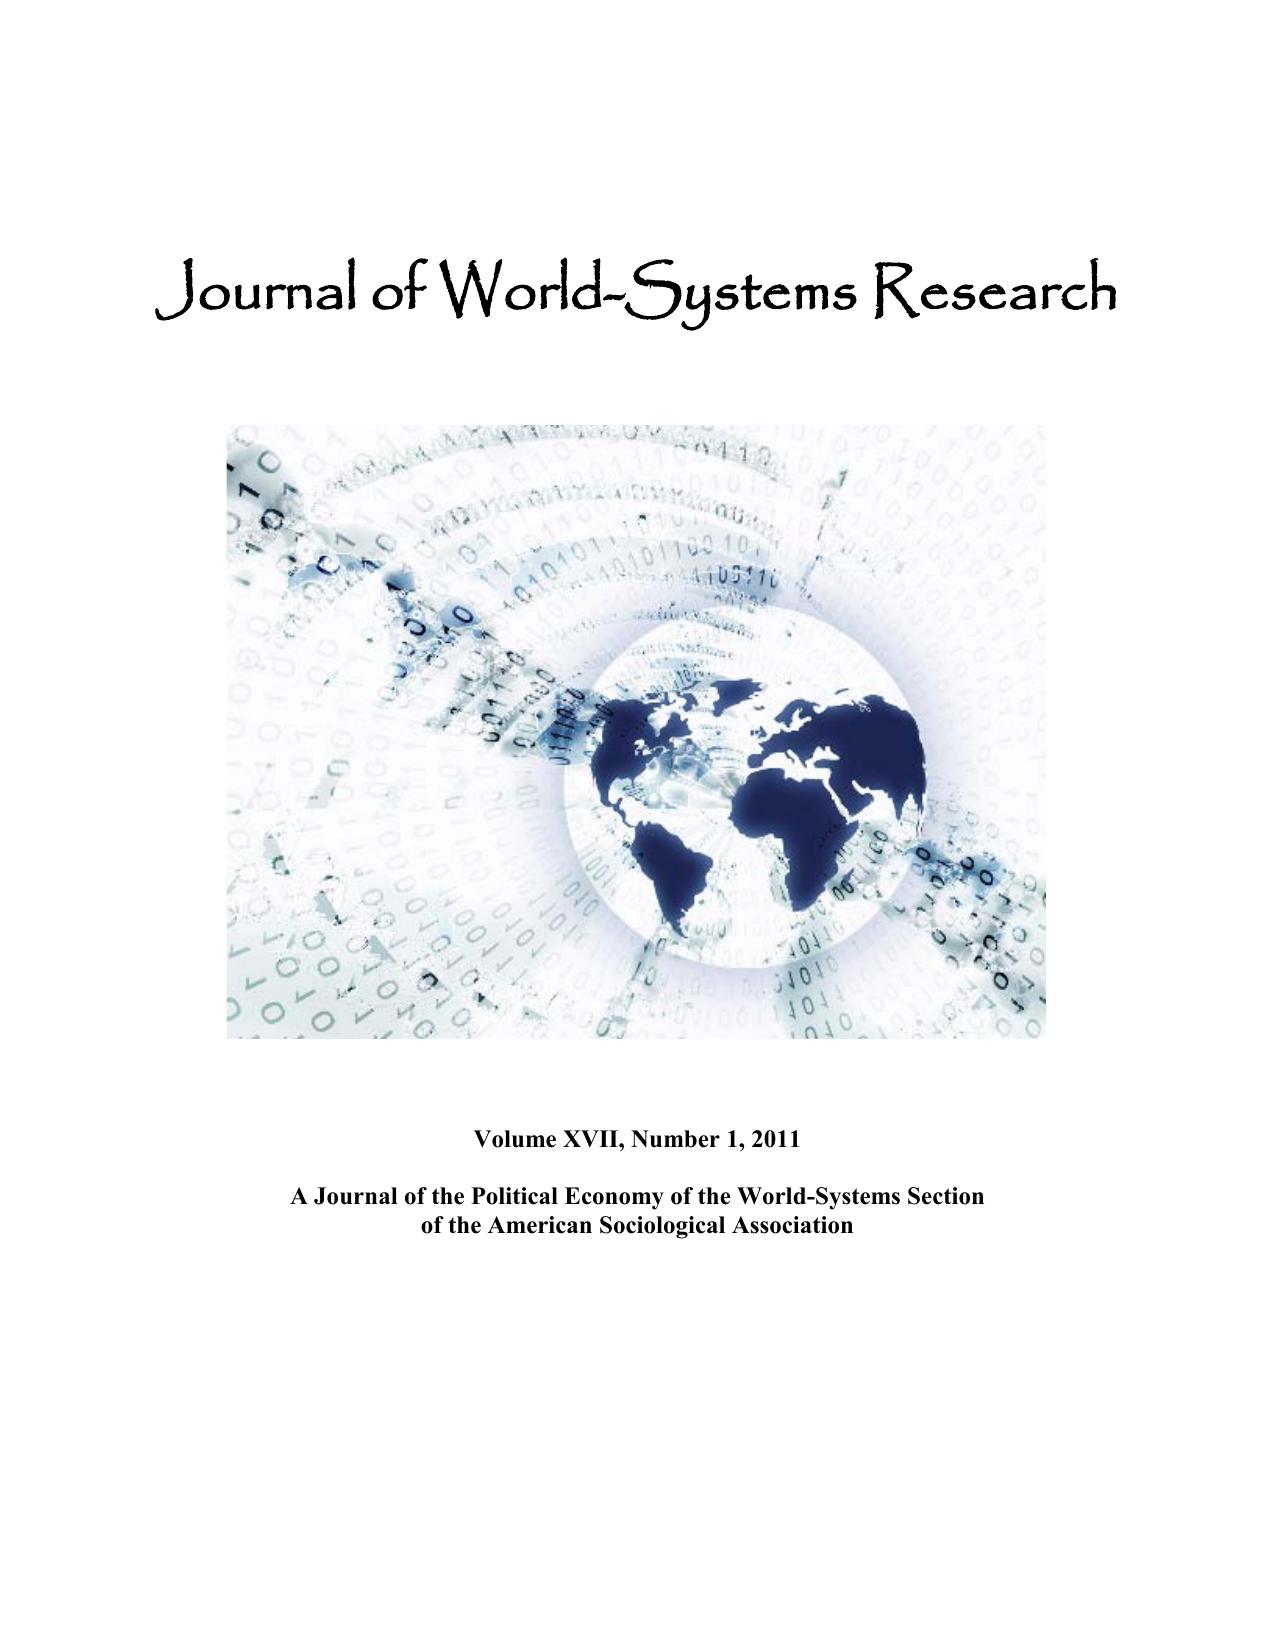 Journal of World-Systems Research - Entire Volume 17 issue 1